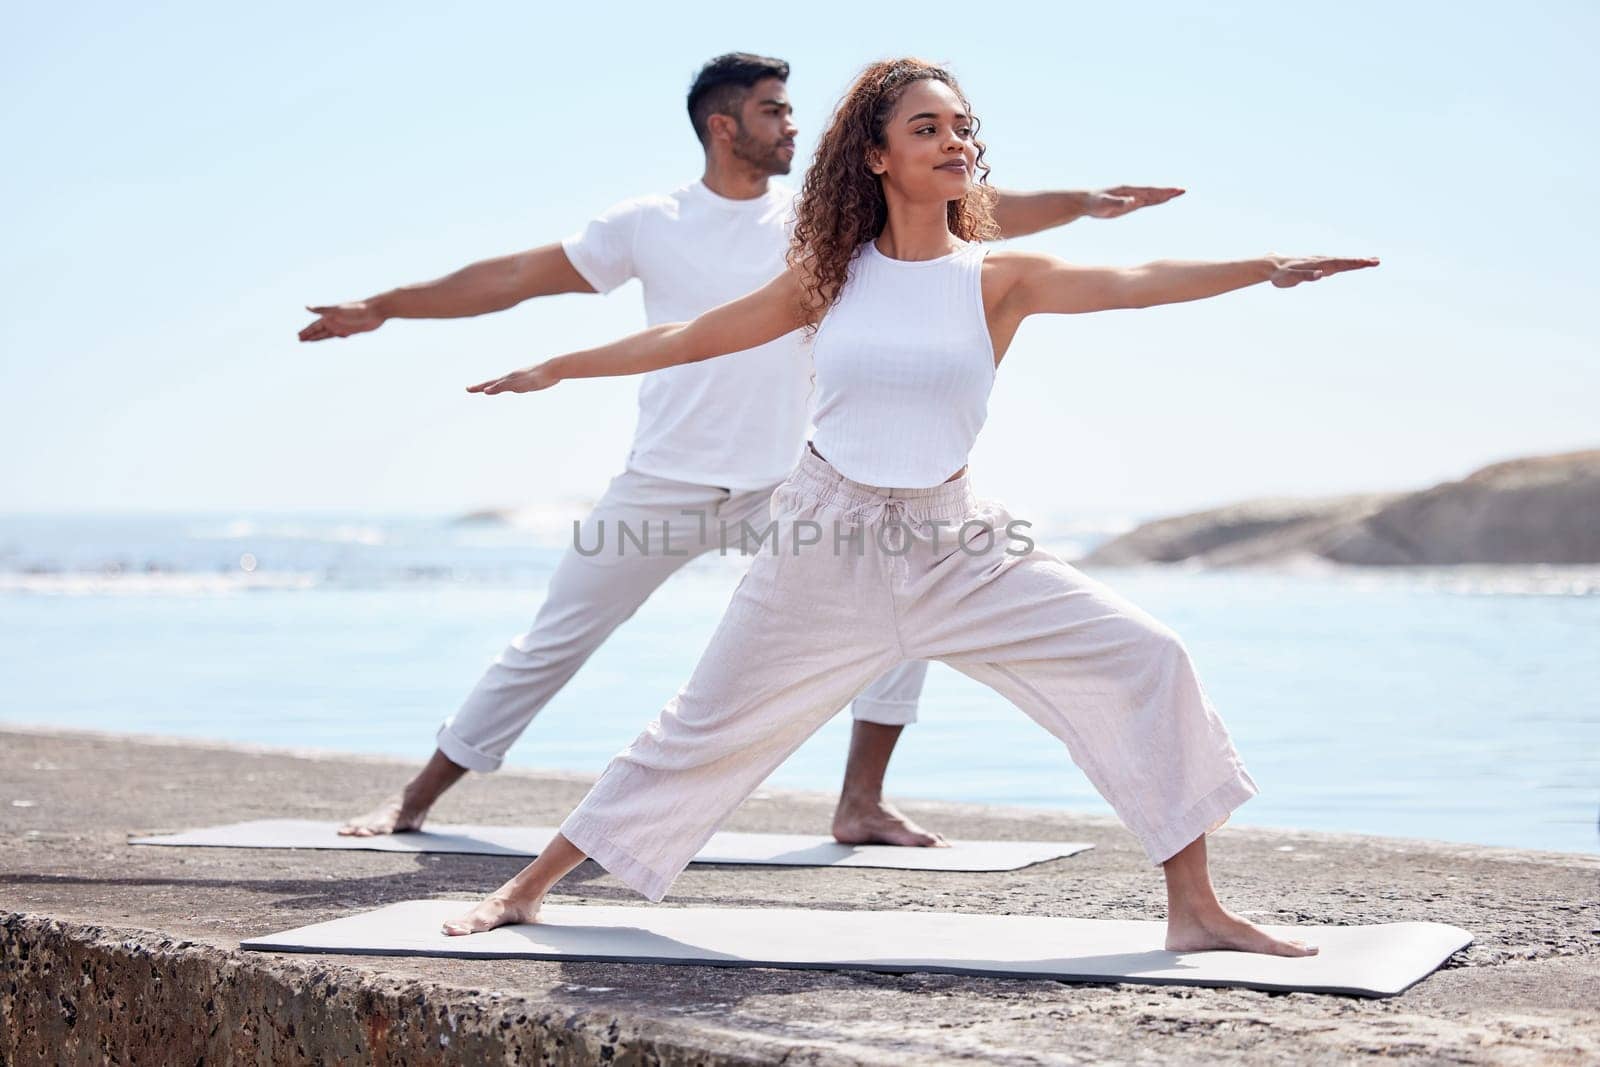 Couple yoga, beach and exercise outdoor in nature for fitness workout and wellness. African woman and a man at ocean for warrior pose, stretching or pilates training for peace, freedom or mindfulness.